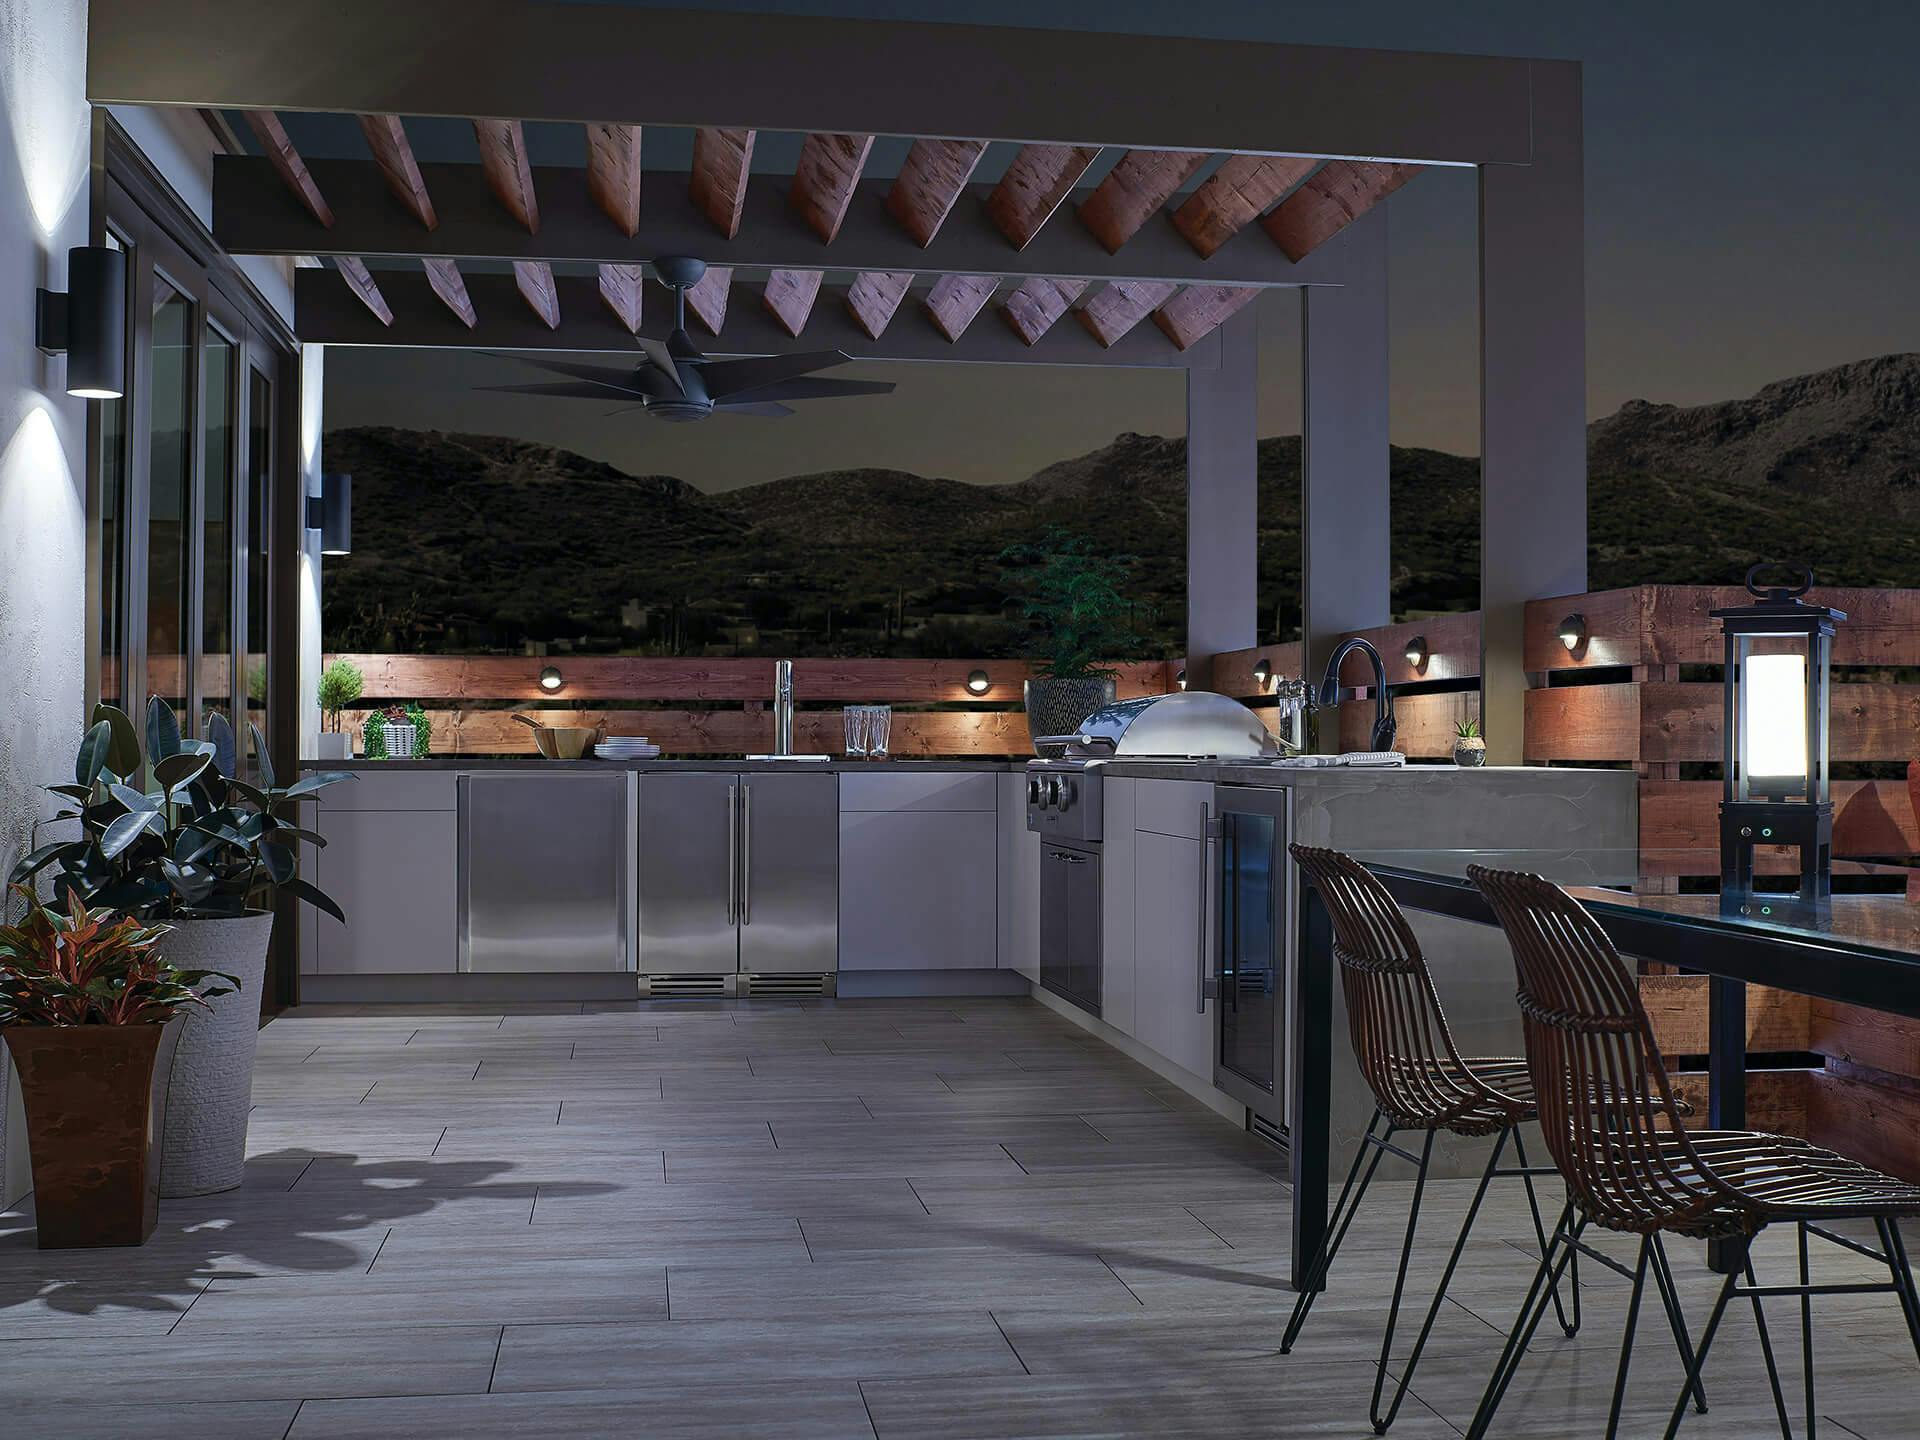 Spacious outdoor kitchen with Lehr 2 ceiling fan attached to a wooden overhang at night with accent lighting throughout